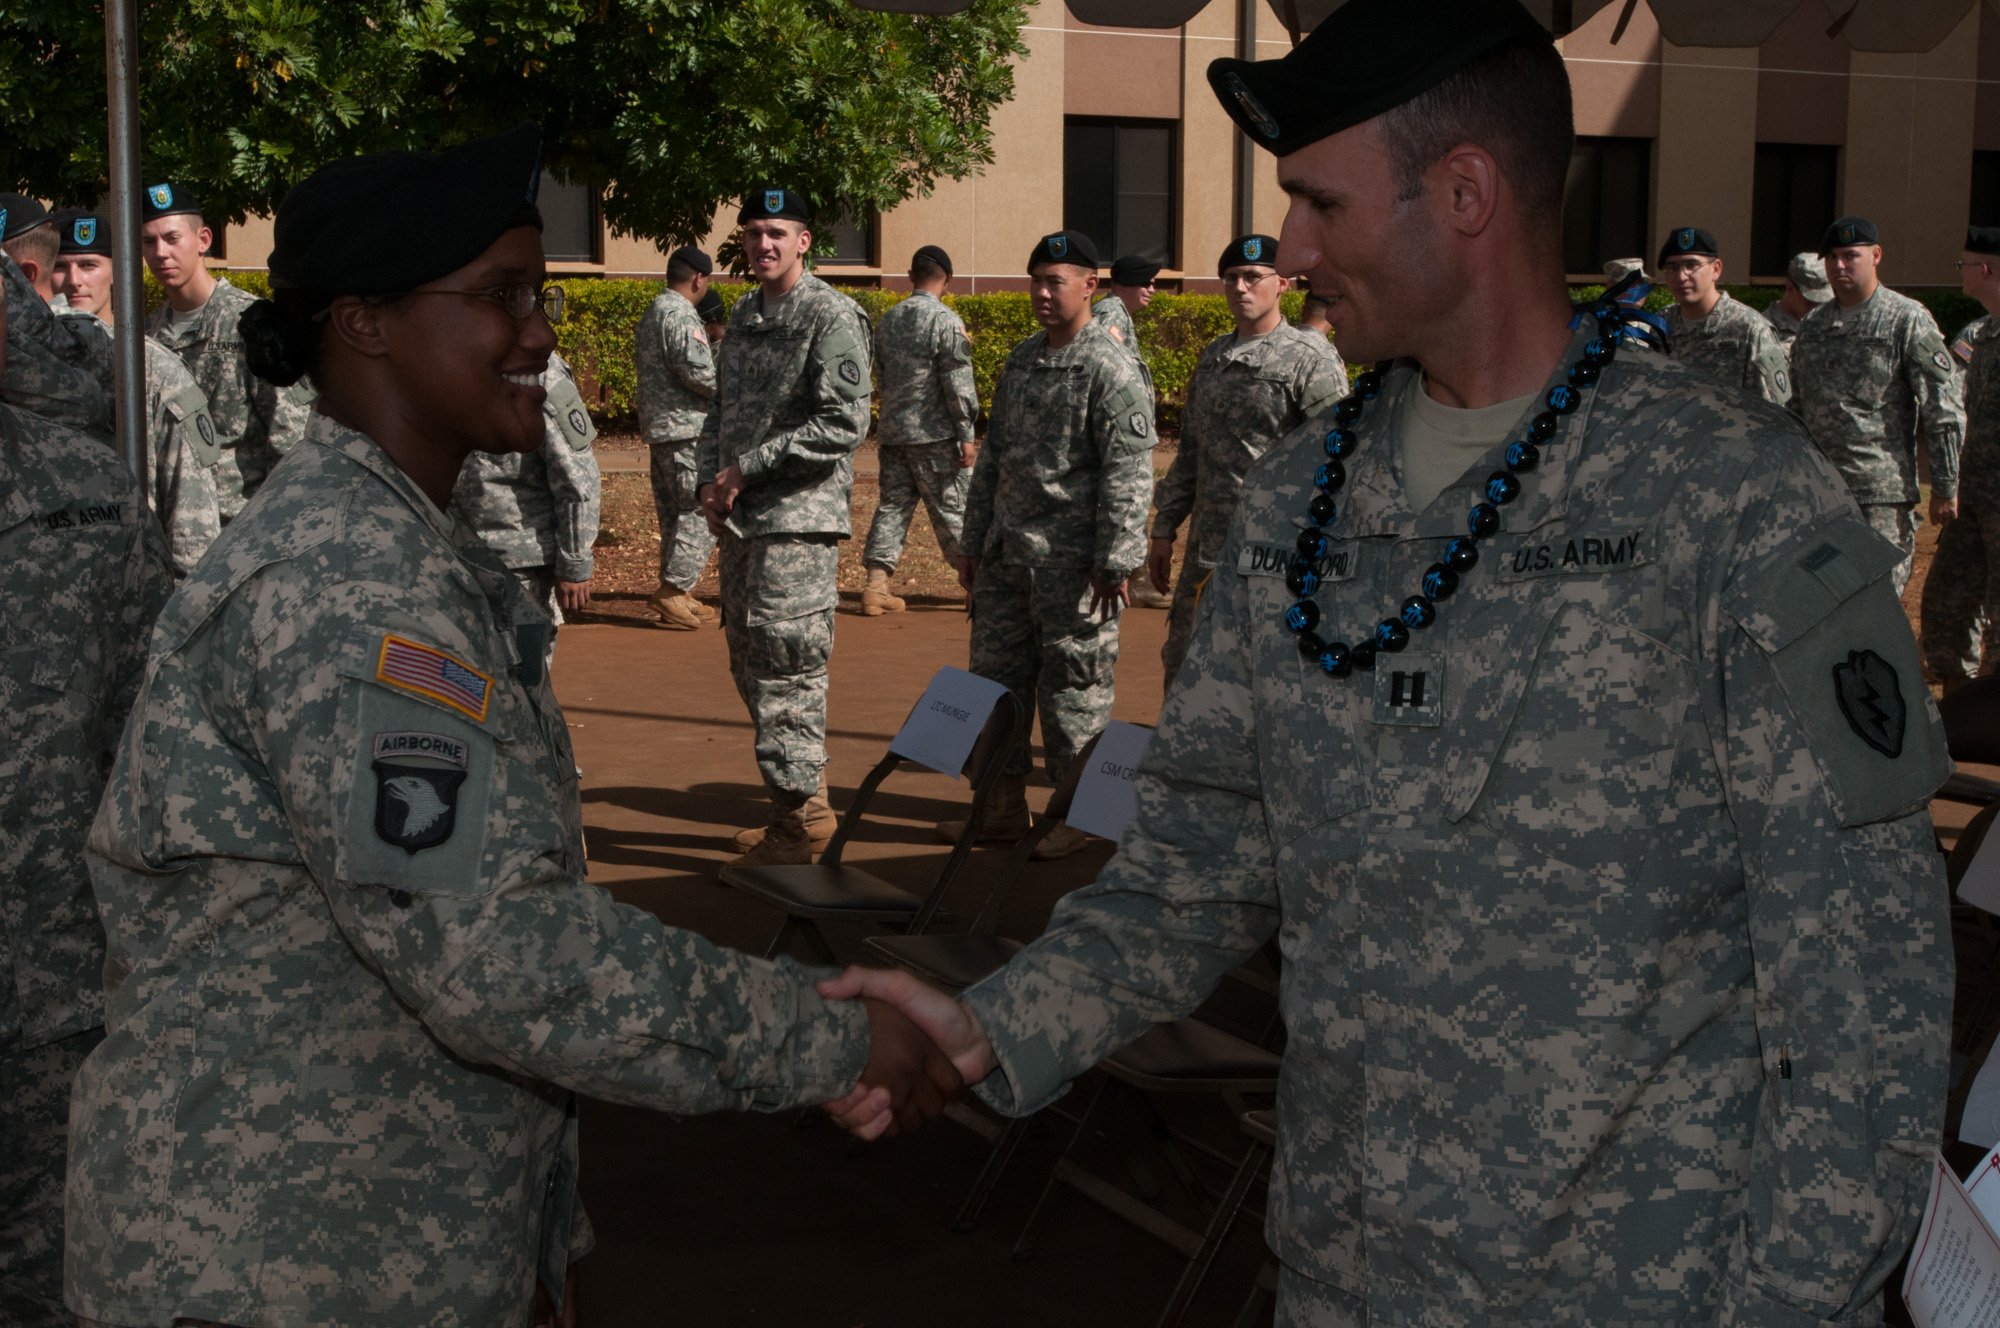 two soldiers shake hands and laugh in front of many other people